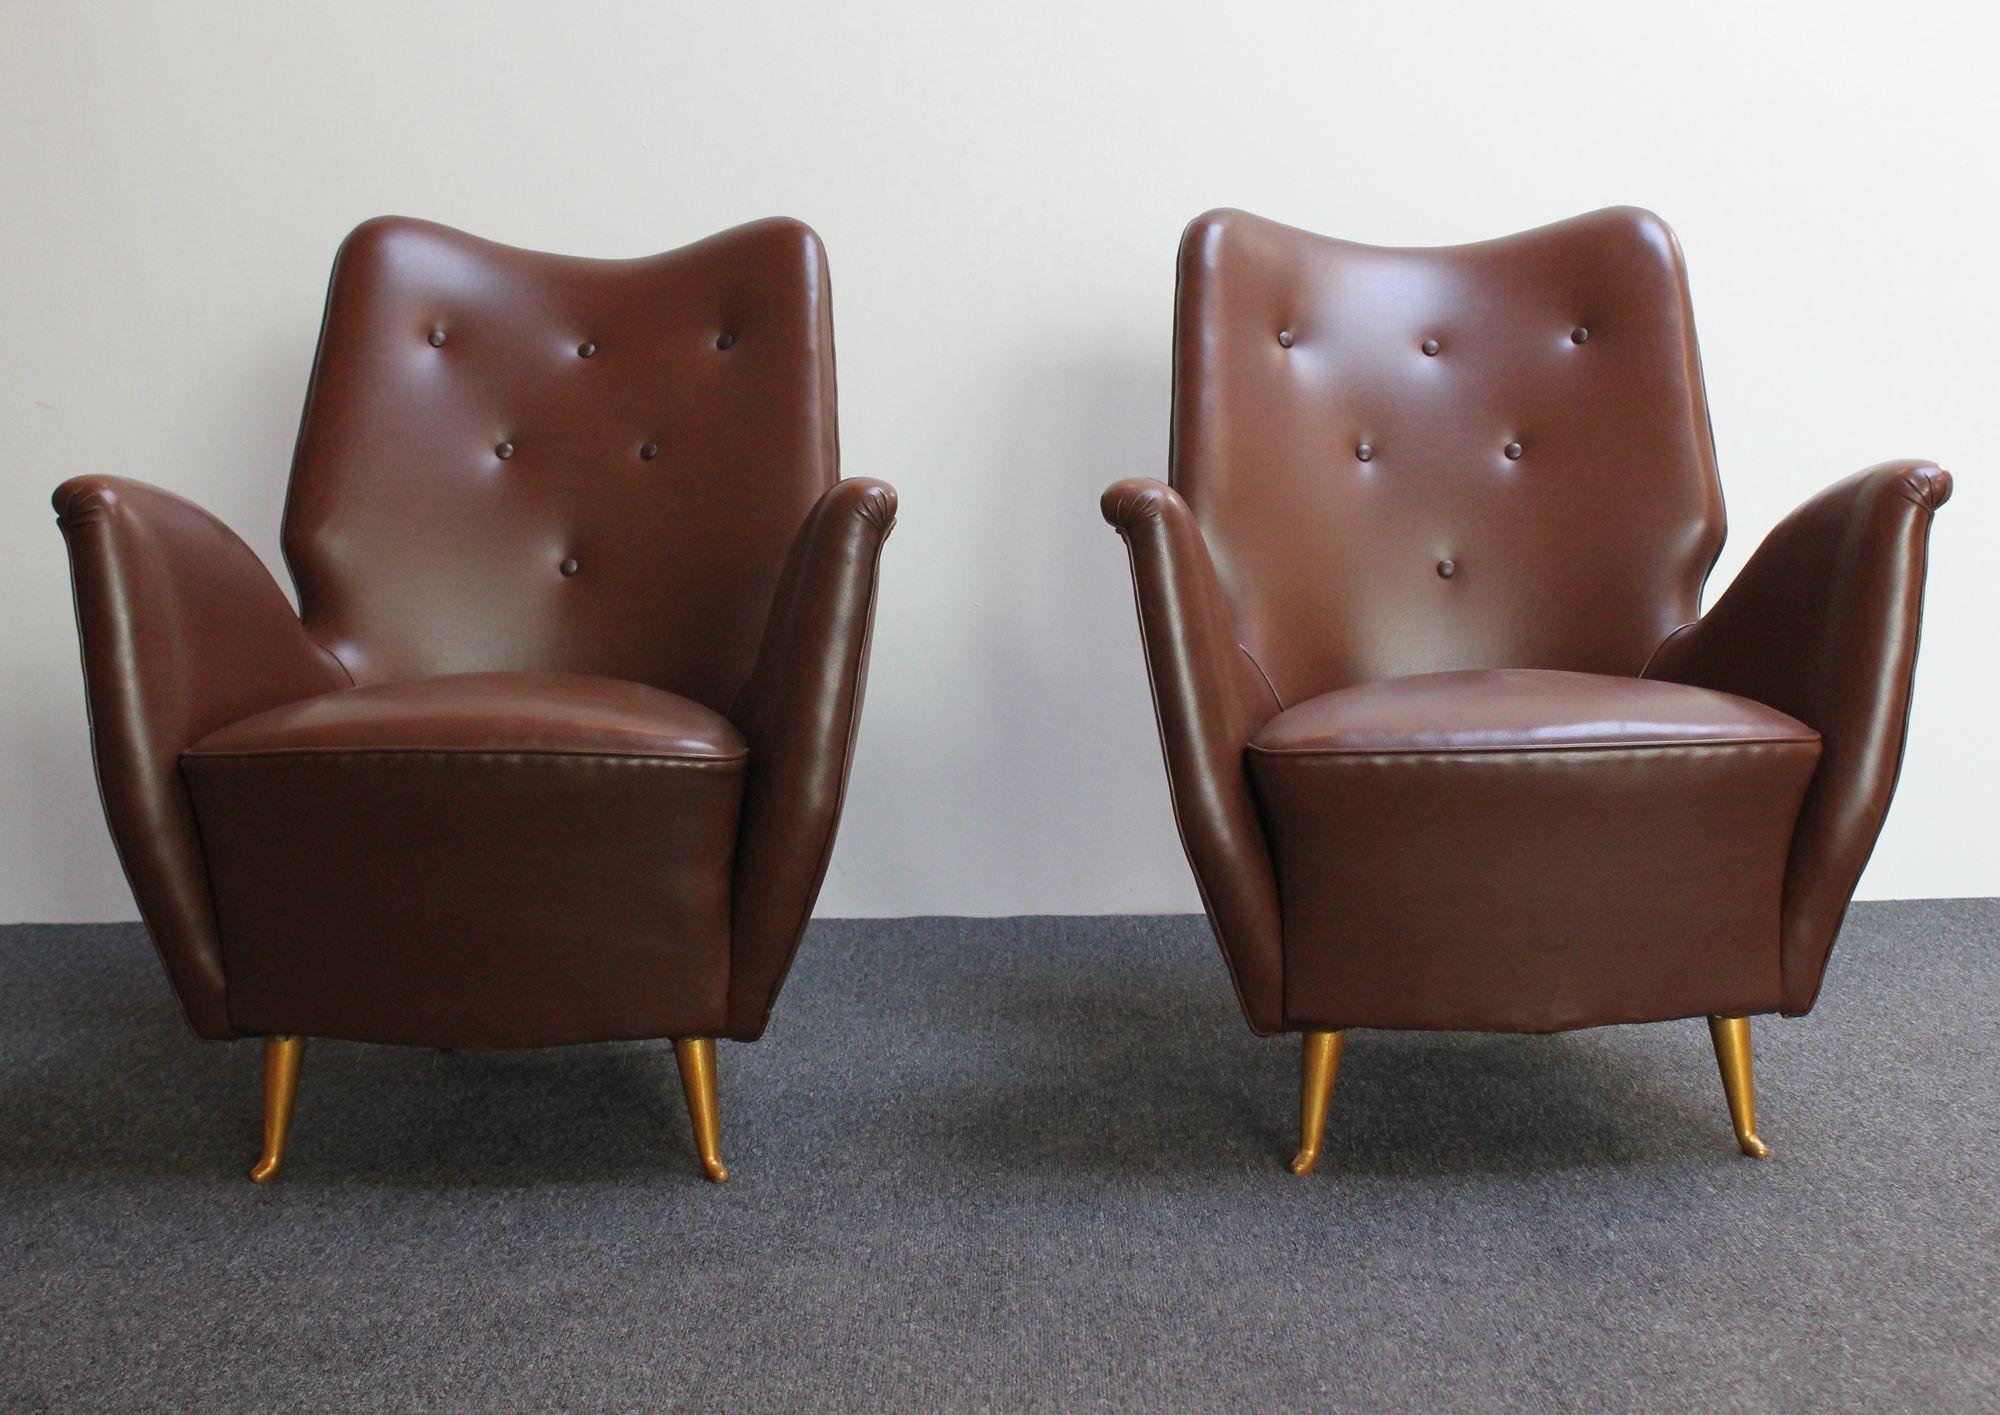 Low and petite Isa Bergamo arm/club chairs attributed to Gio Ponti characterized by pronounced/exaggeratedly sculpted arms in chocolate vinyl with button tufted details (ca. 1950s, Italy).
Original spring construction present with the frame